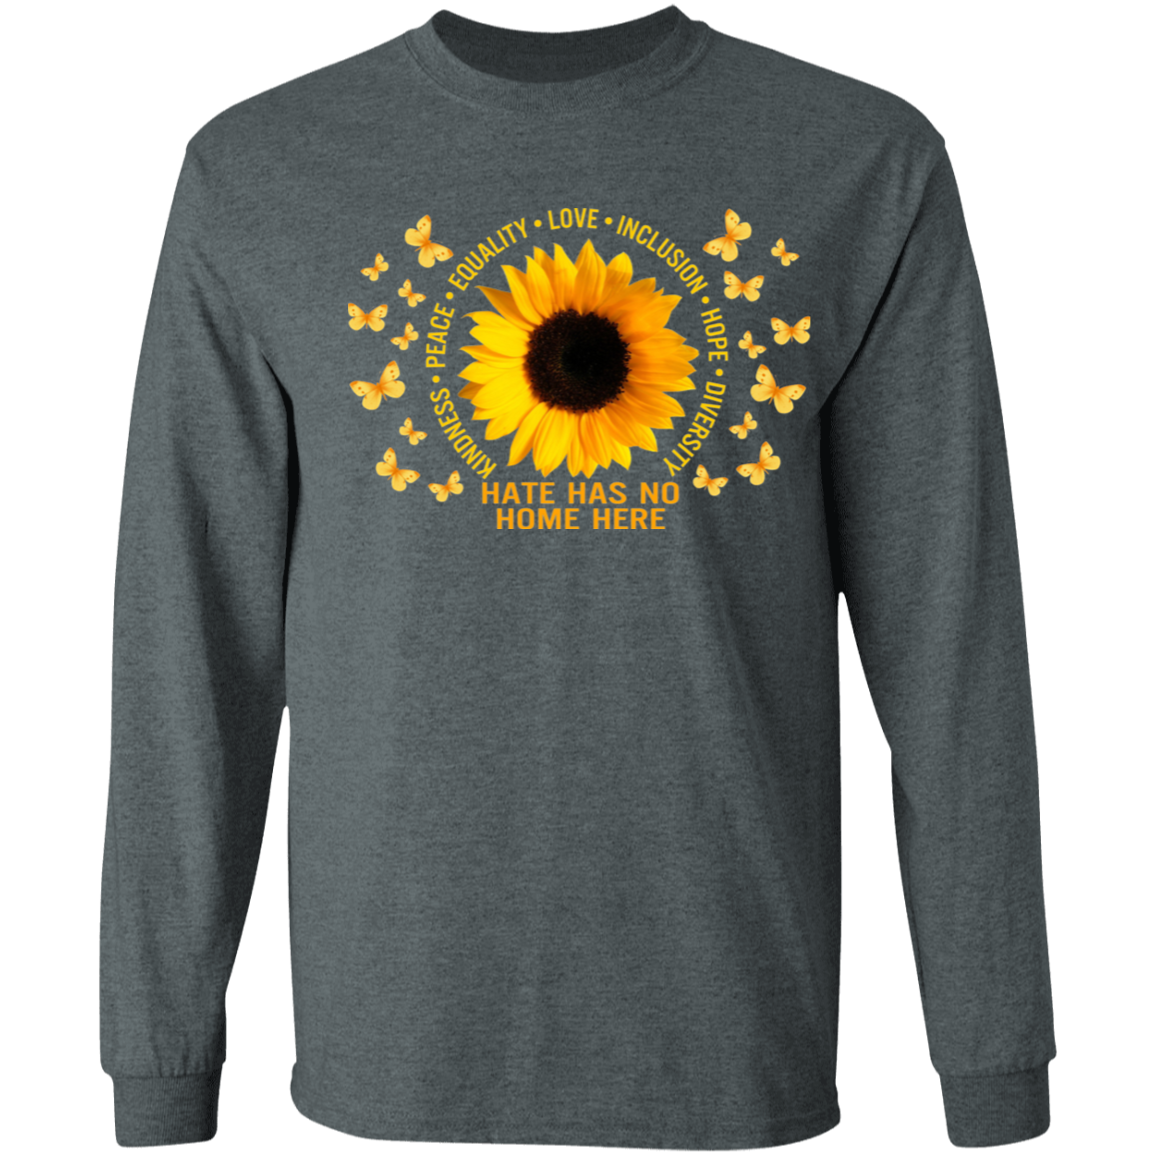 Kindness peace equality love inclusion hope diversity sunflower shirt